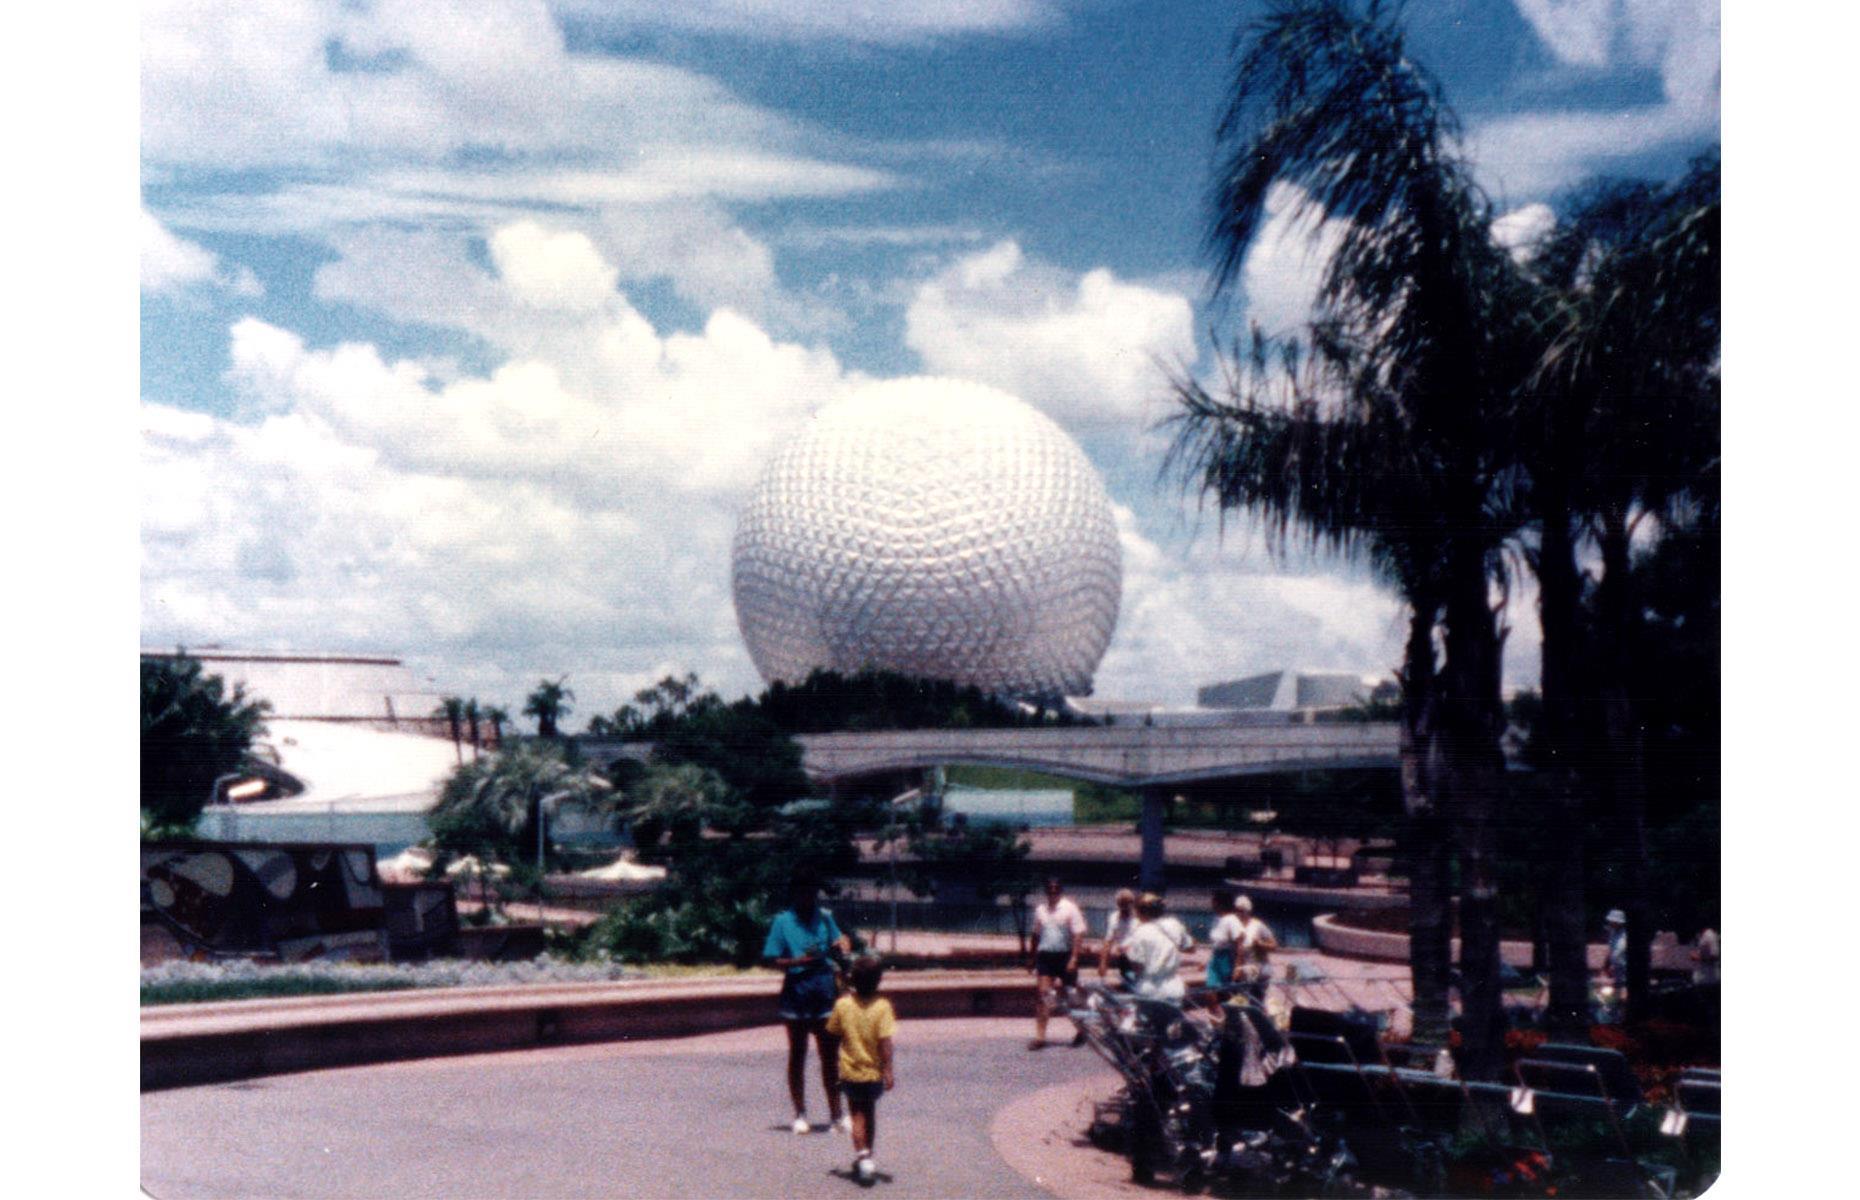 <p>After Disney’s arrival in Florida proved to be a roaring success, Epcot (then Epcot Center) opened in 1982. The theme park, whose name stands for Experimental Prototype Community of Tomorrow, was initially intended to be a city where people would live and work. However, since Walt Disney died before his vision was realized, the site was turned into a glittering amusement park instead. It was the second of four theme parks to be built at Walt Disney World Resort. Discover <a href="https://www.loveexploring.com/gallerylist/72696/beyond-disney-the-best-theme-parks-in-america">America's best theme parks beyond Disney here</a>. </p>